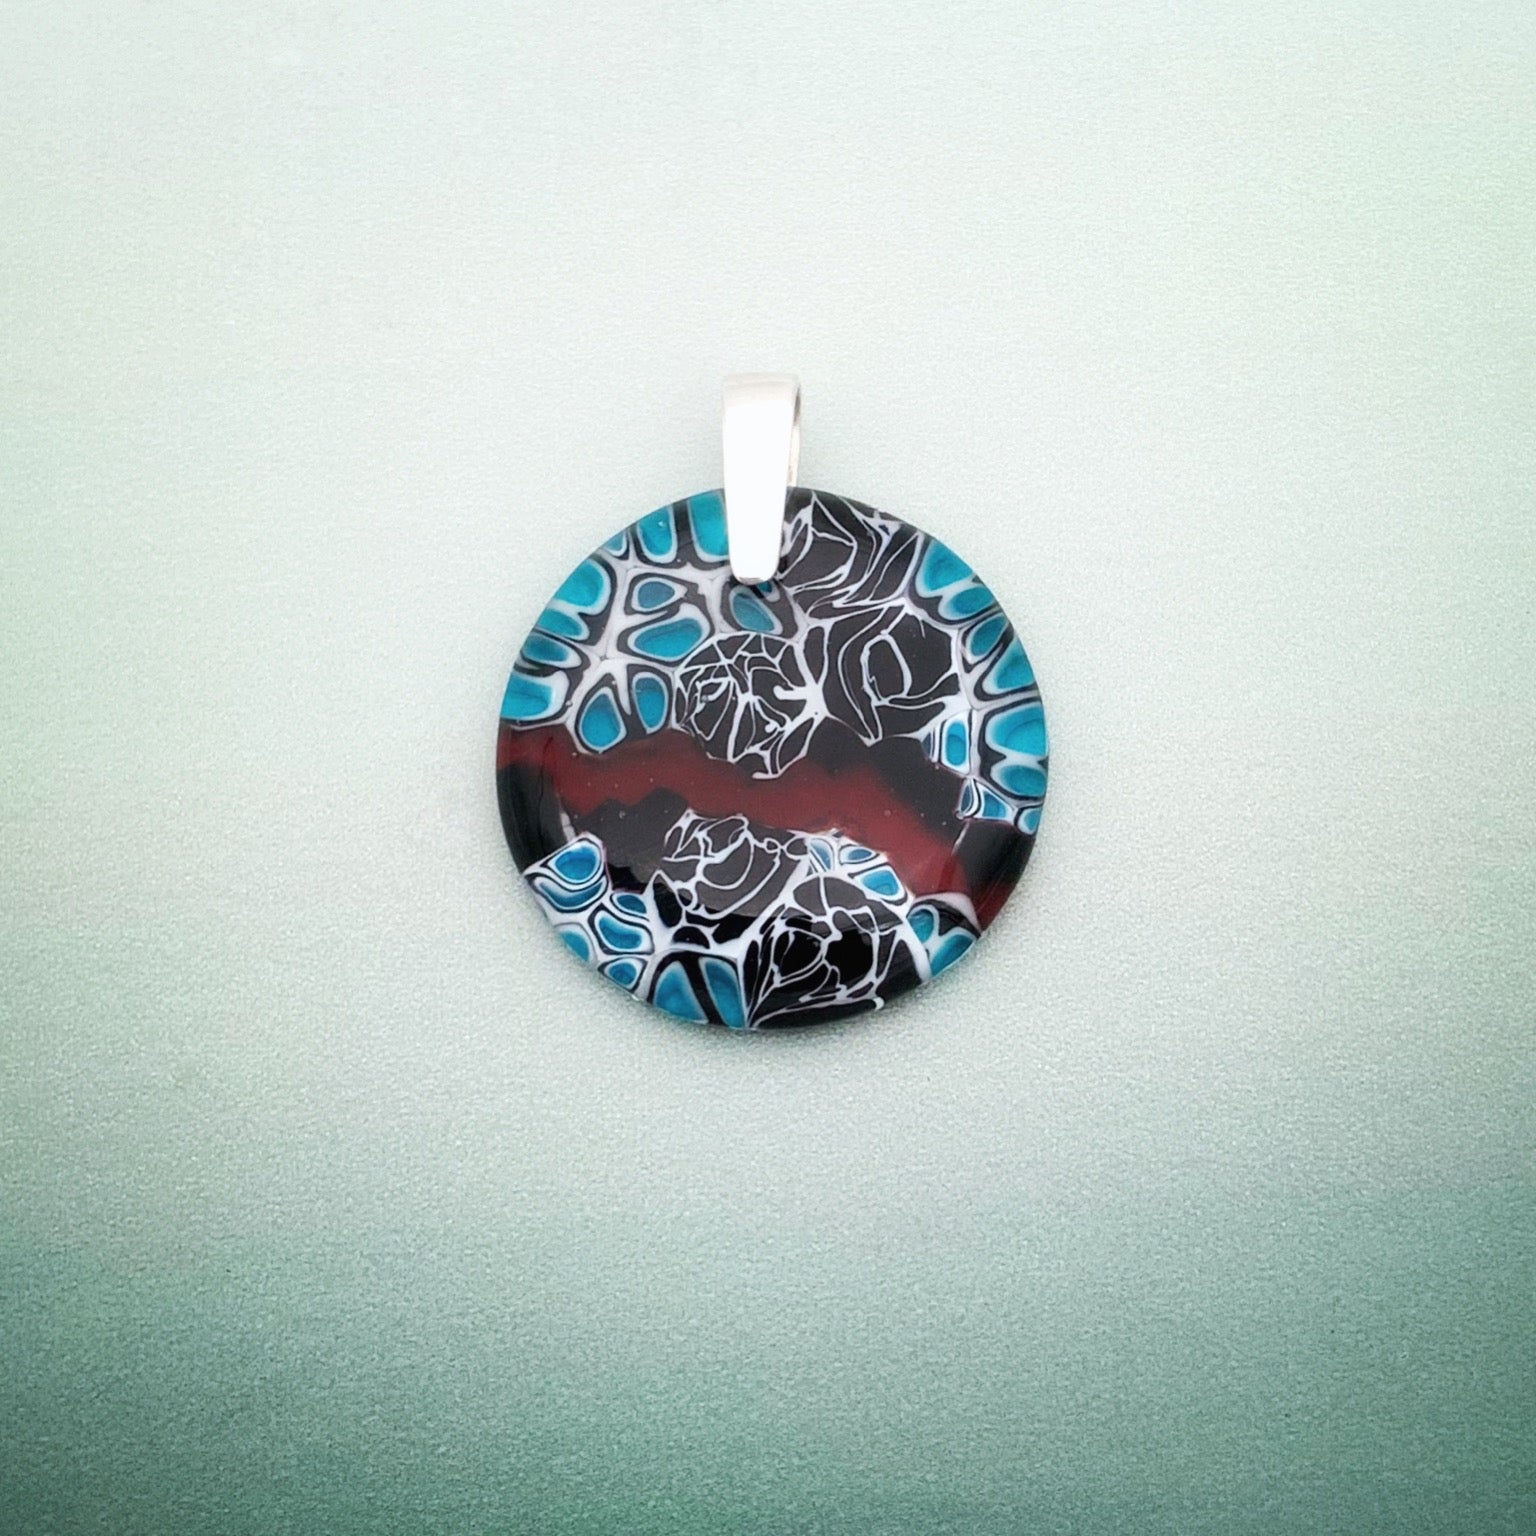 Murrini turquoise red and black 35mm round glass pendant